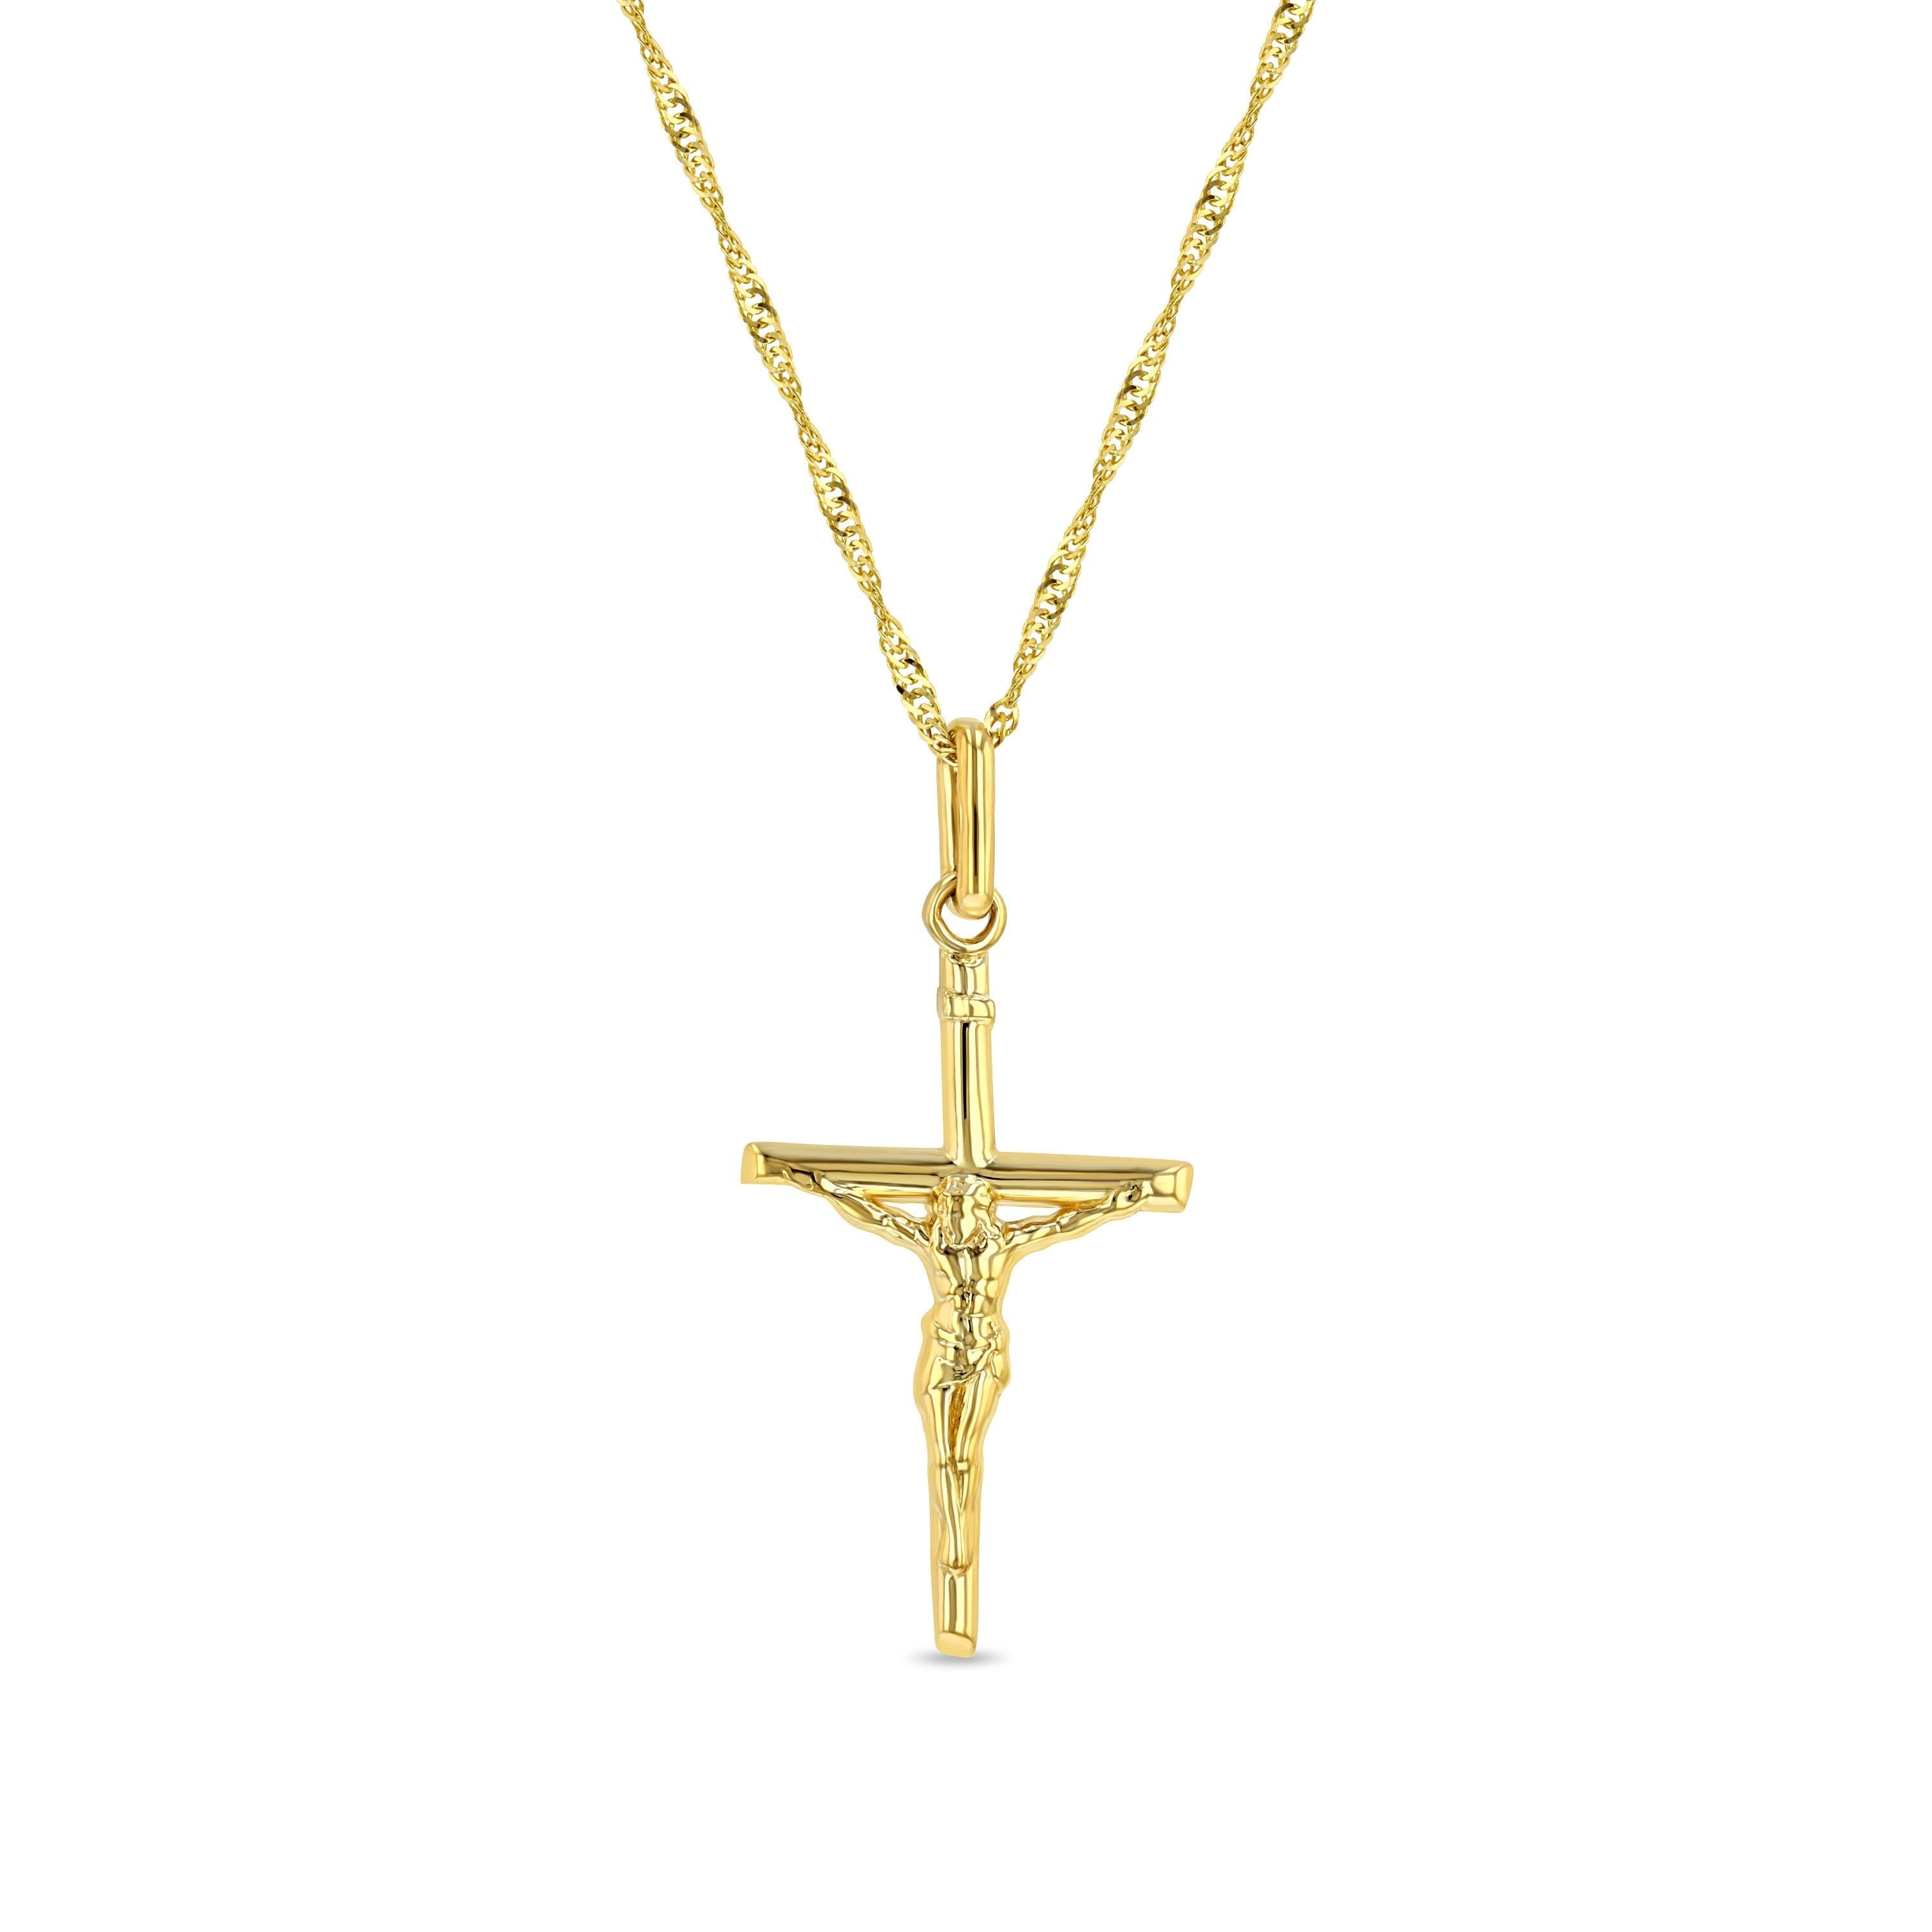 14k solid gold tiny crucifix pendant on 18" solid gold chain